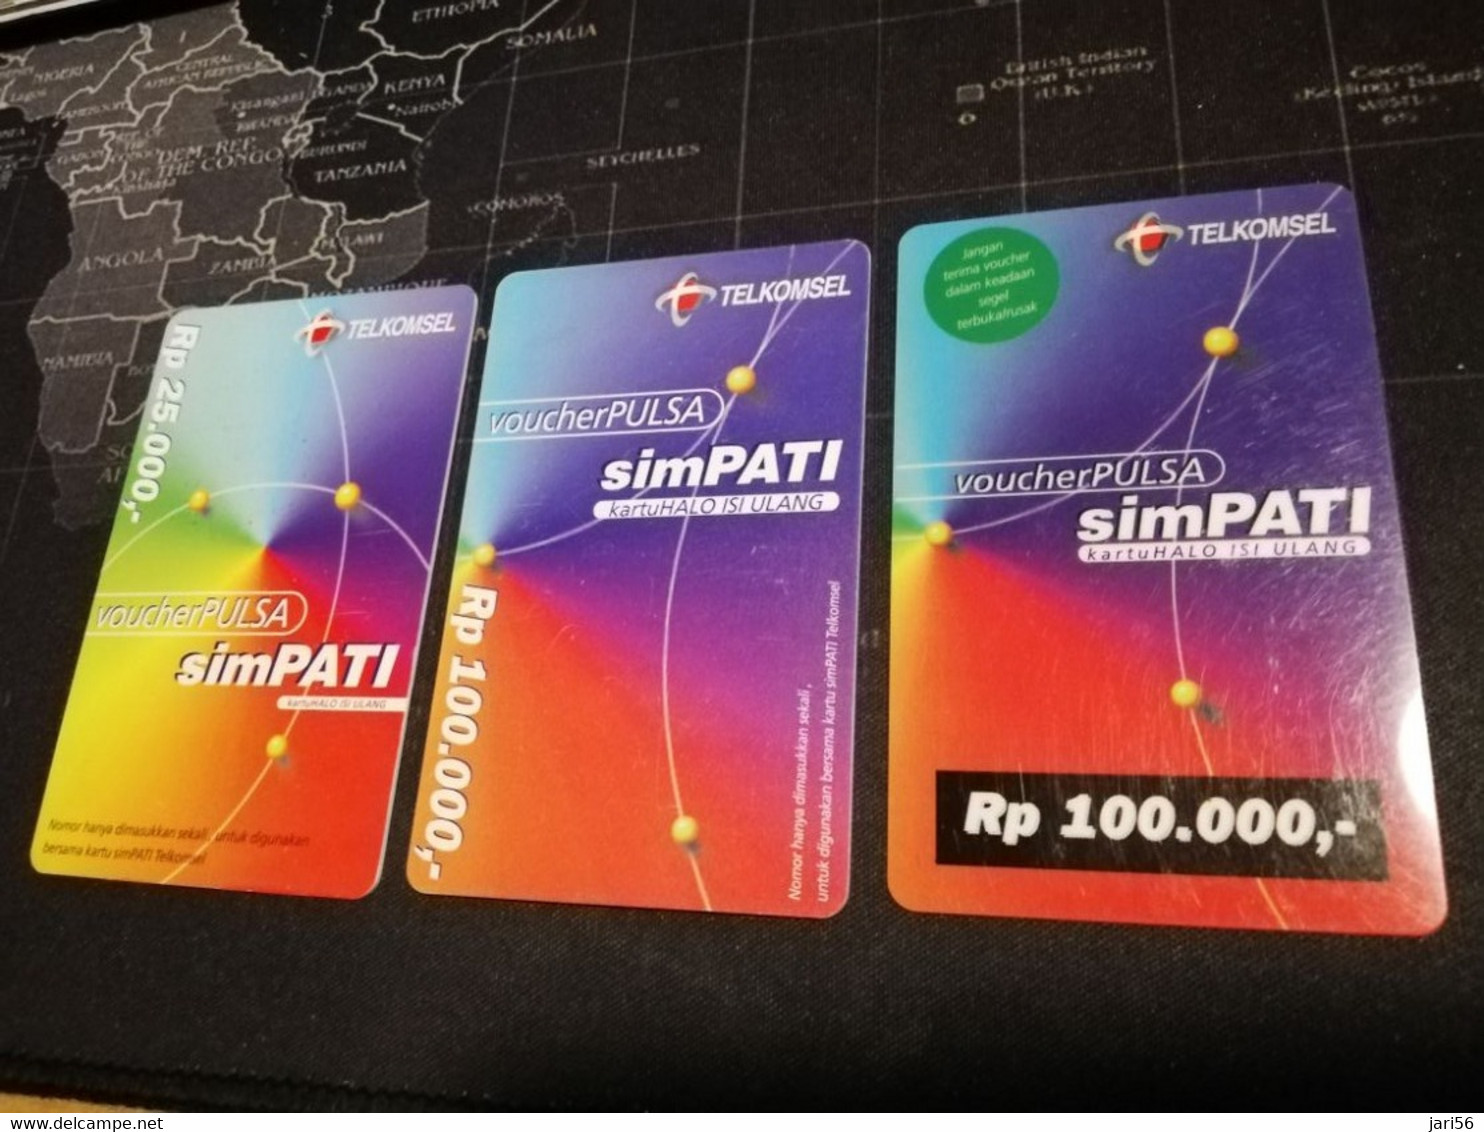 INDONESIA  3 Used Cards  TELKOMSEL RP 25.000 RP 100.000 RP 100.000       Fine Used Cards   **3791 ** - Indonesia